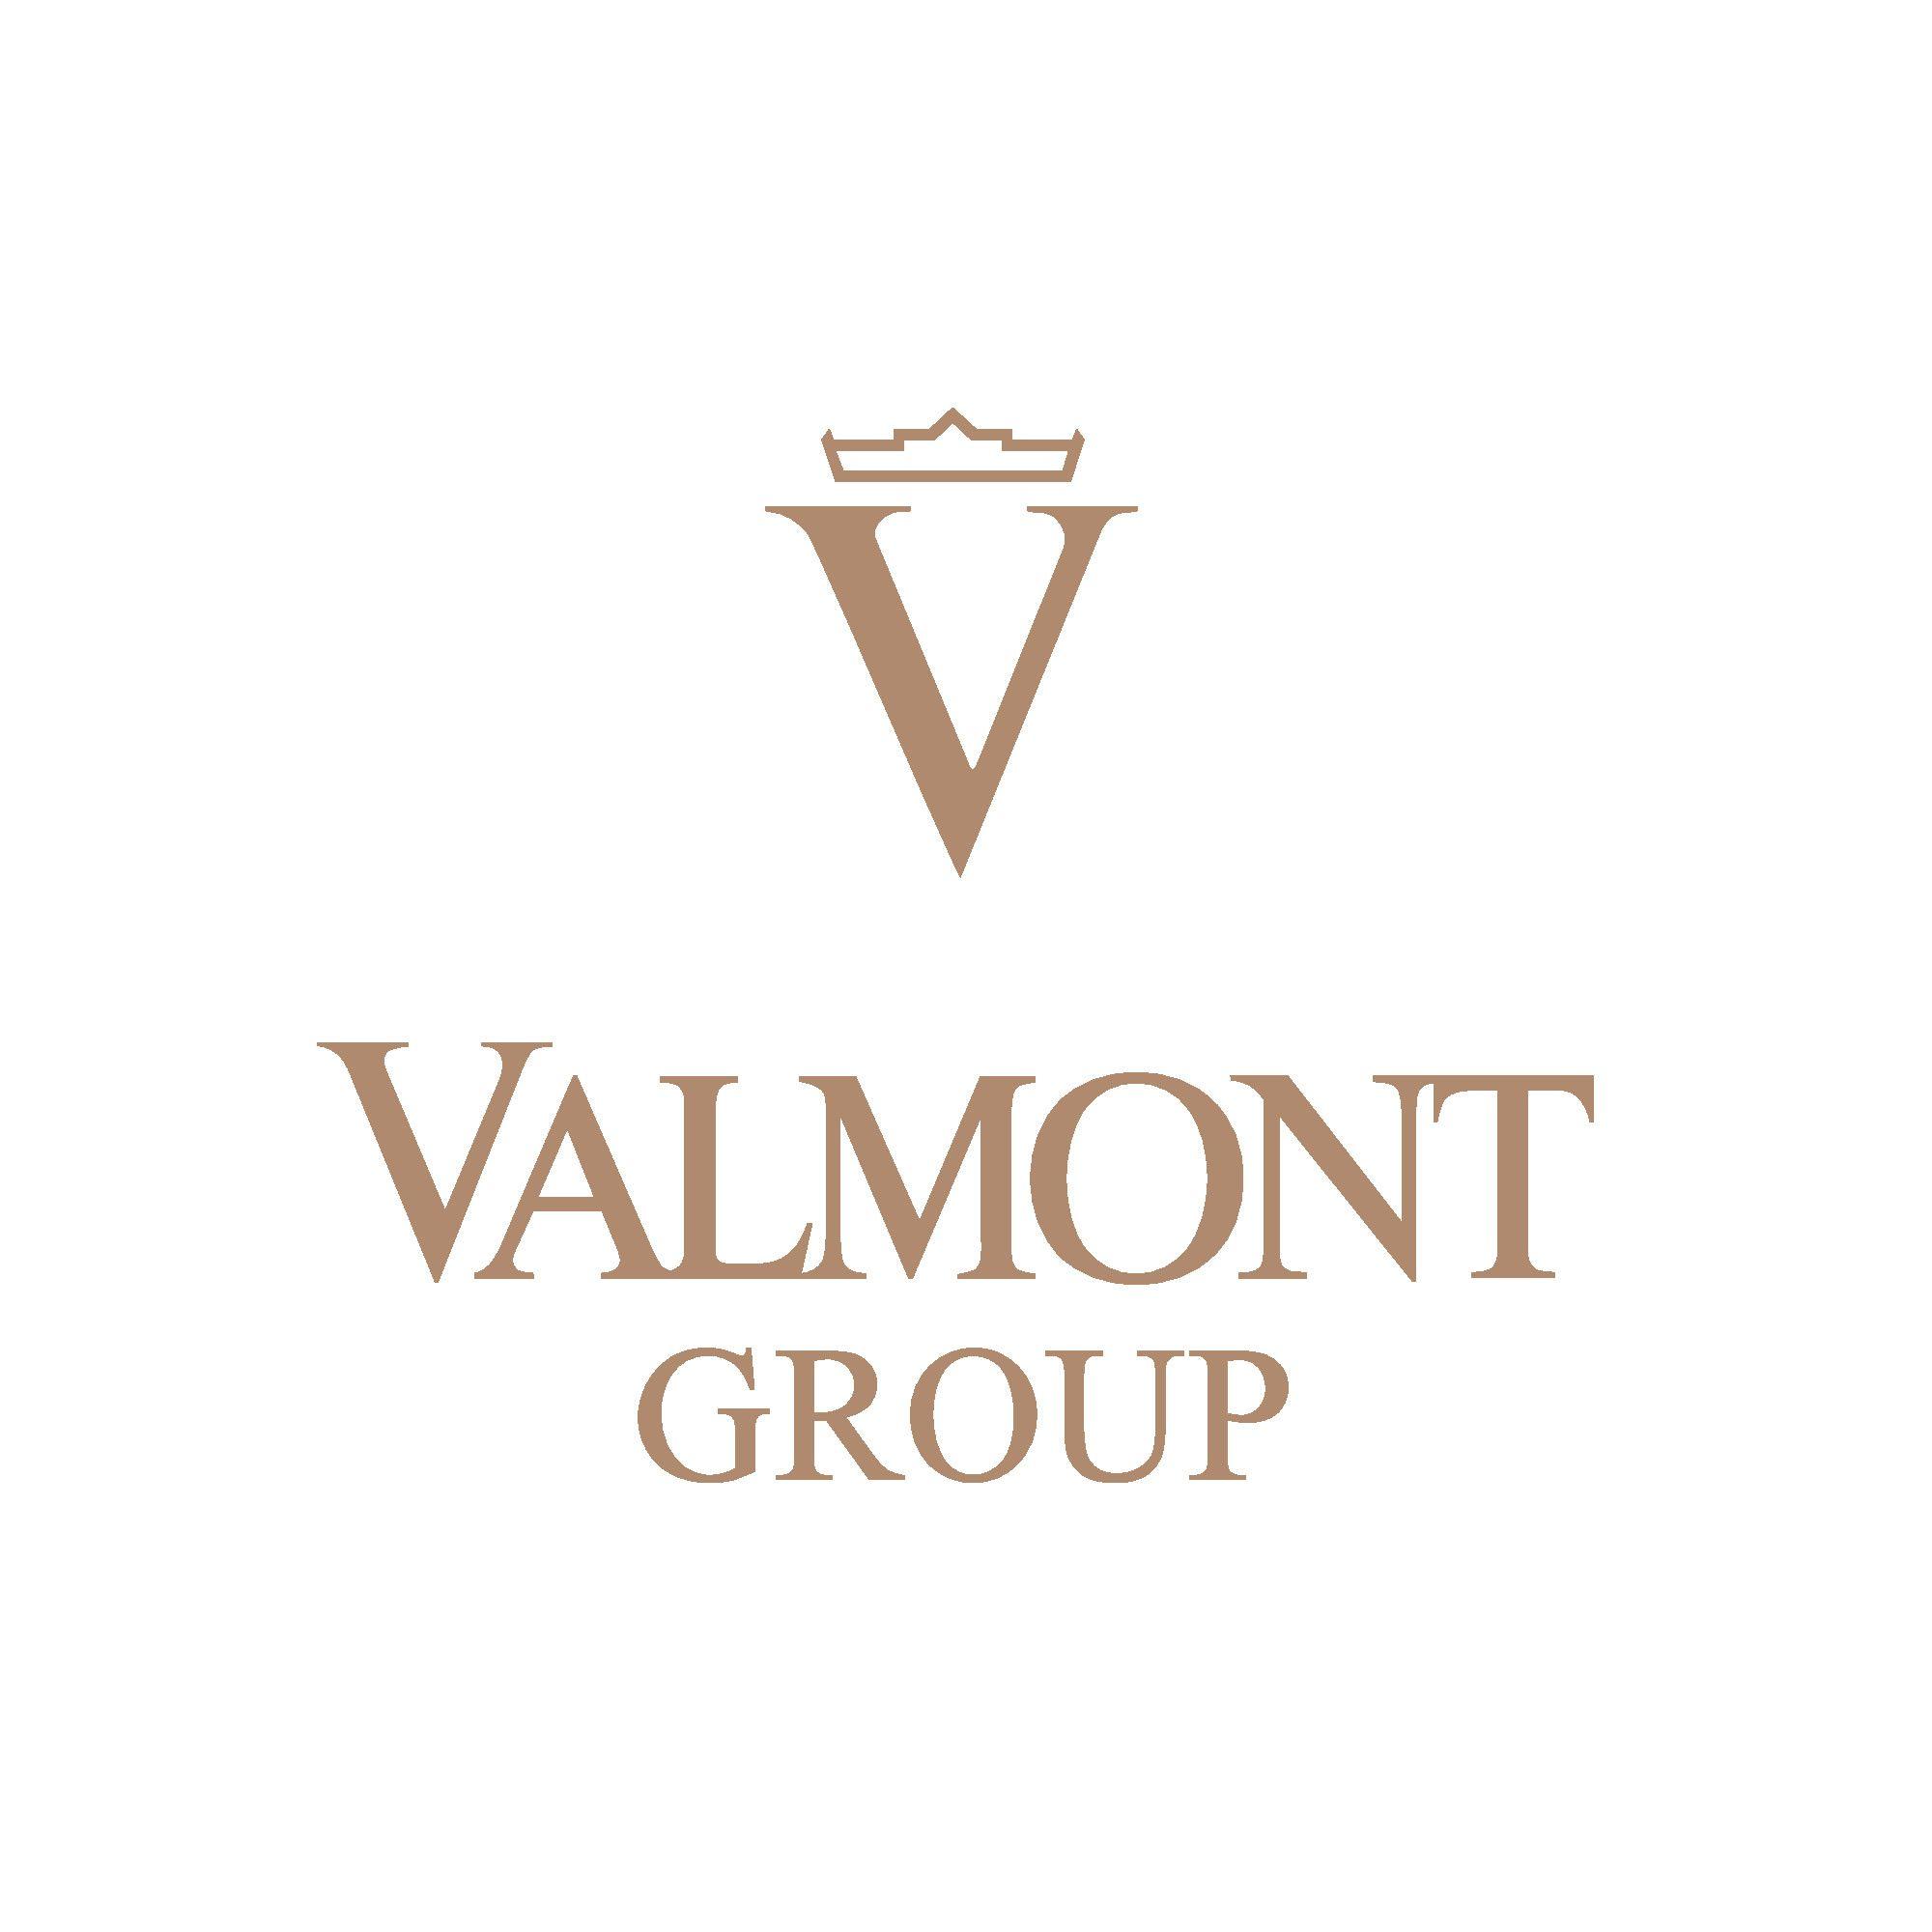 Valmont Logo - Valmont made photocall